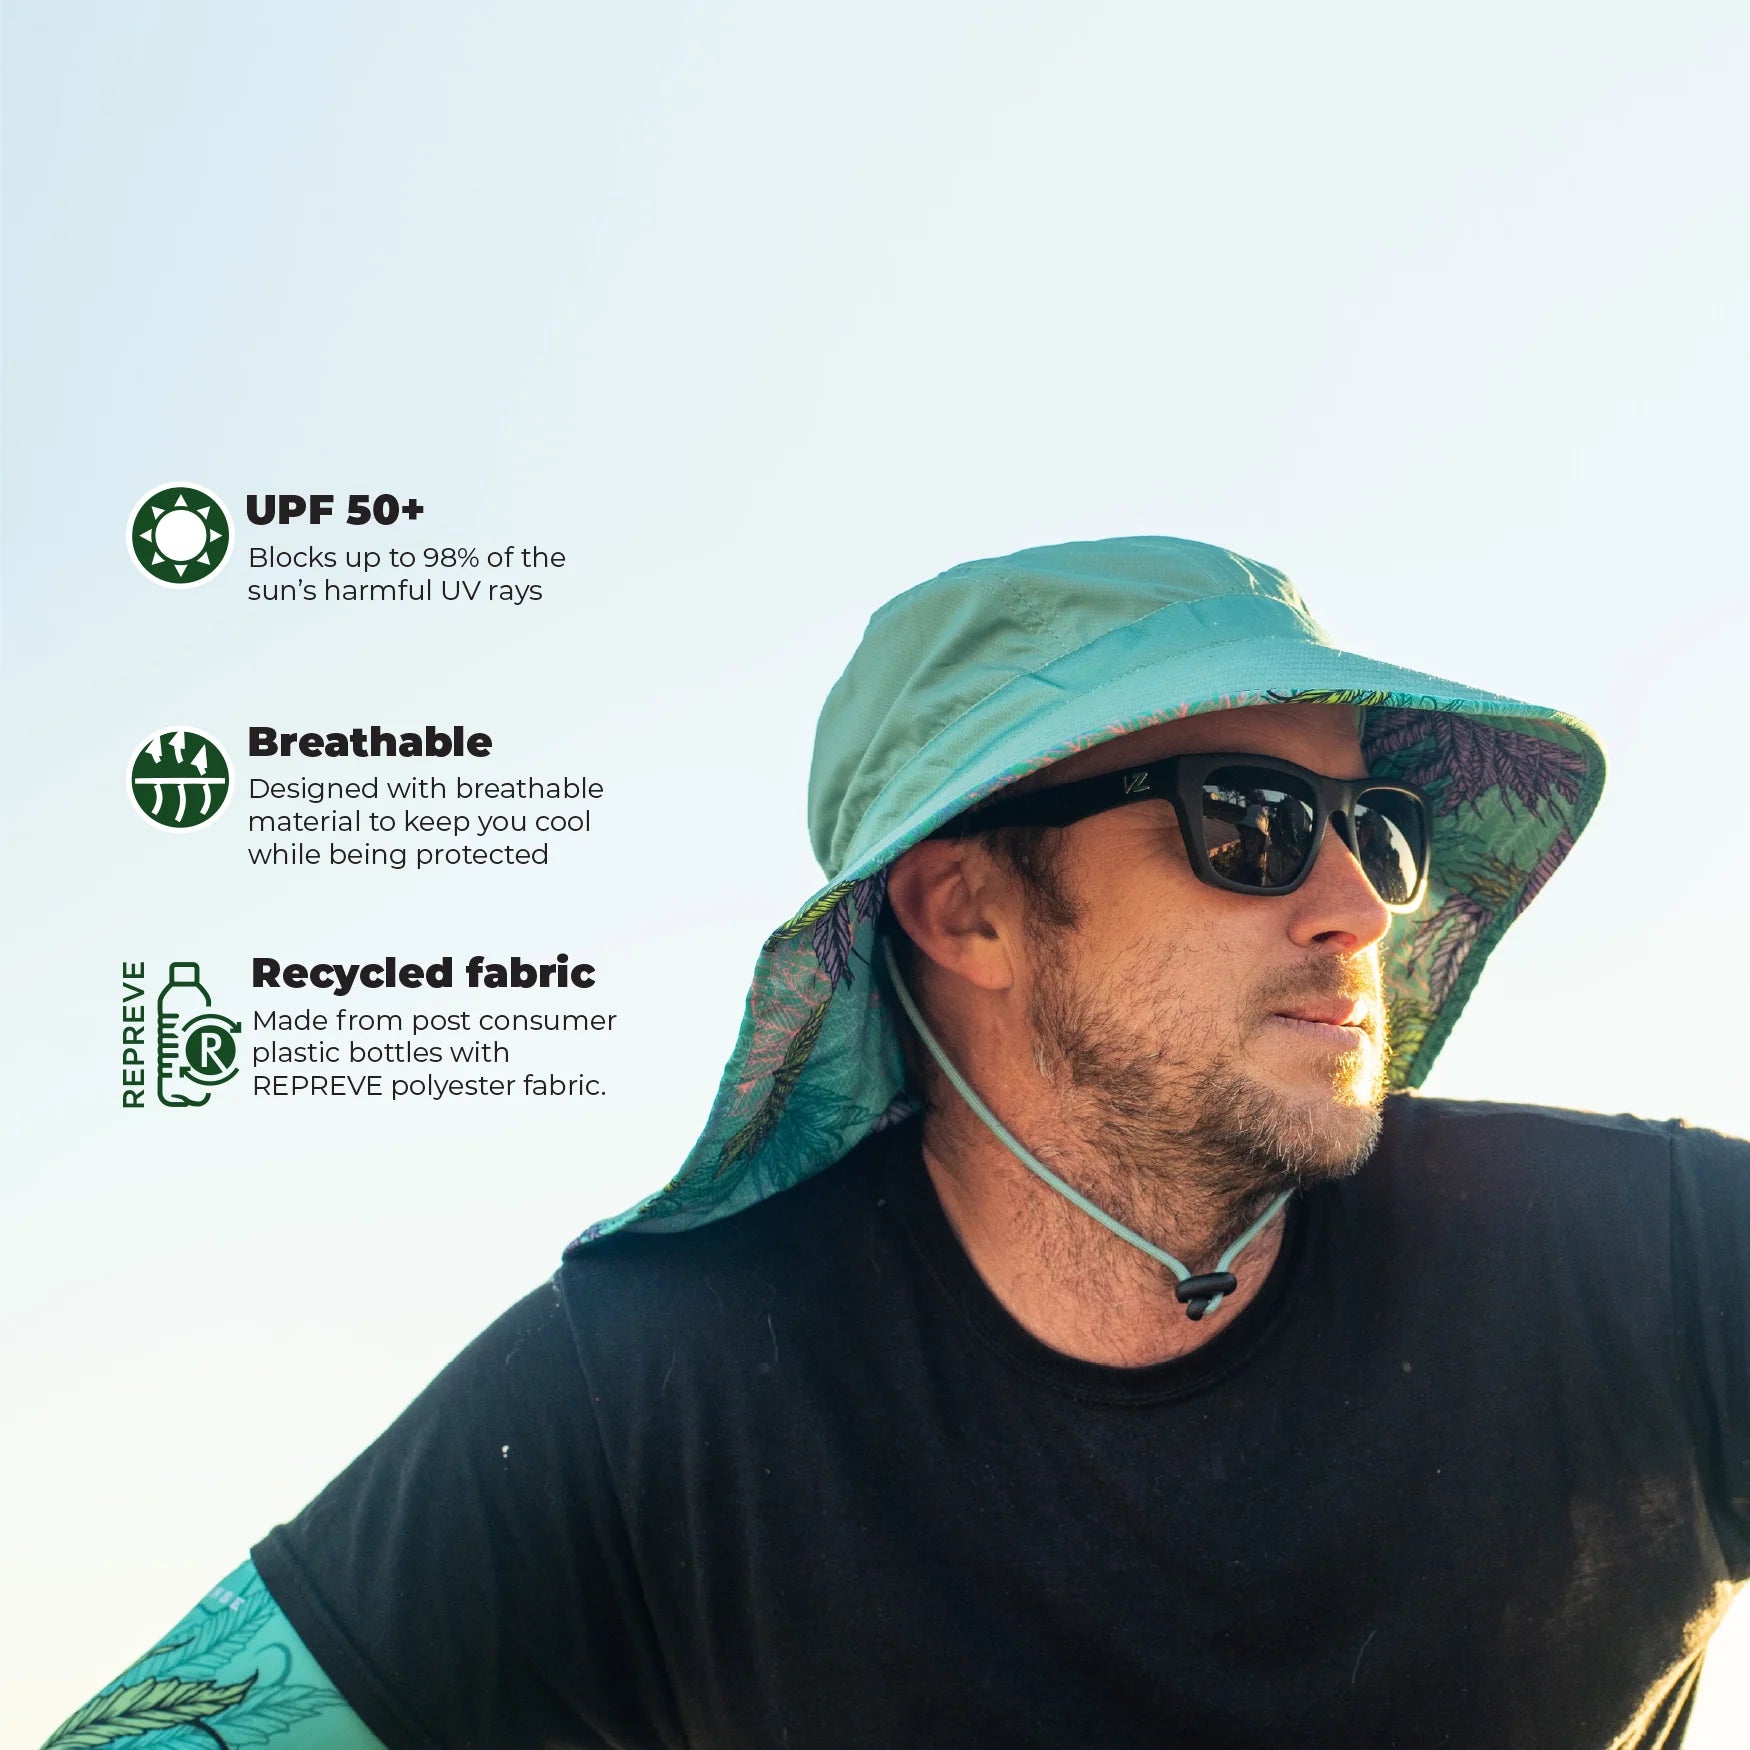 Male model showcasing the Farmers Defense sun hat with a green tropical pattern and sun protection features